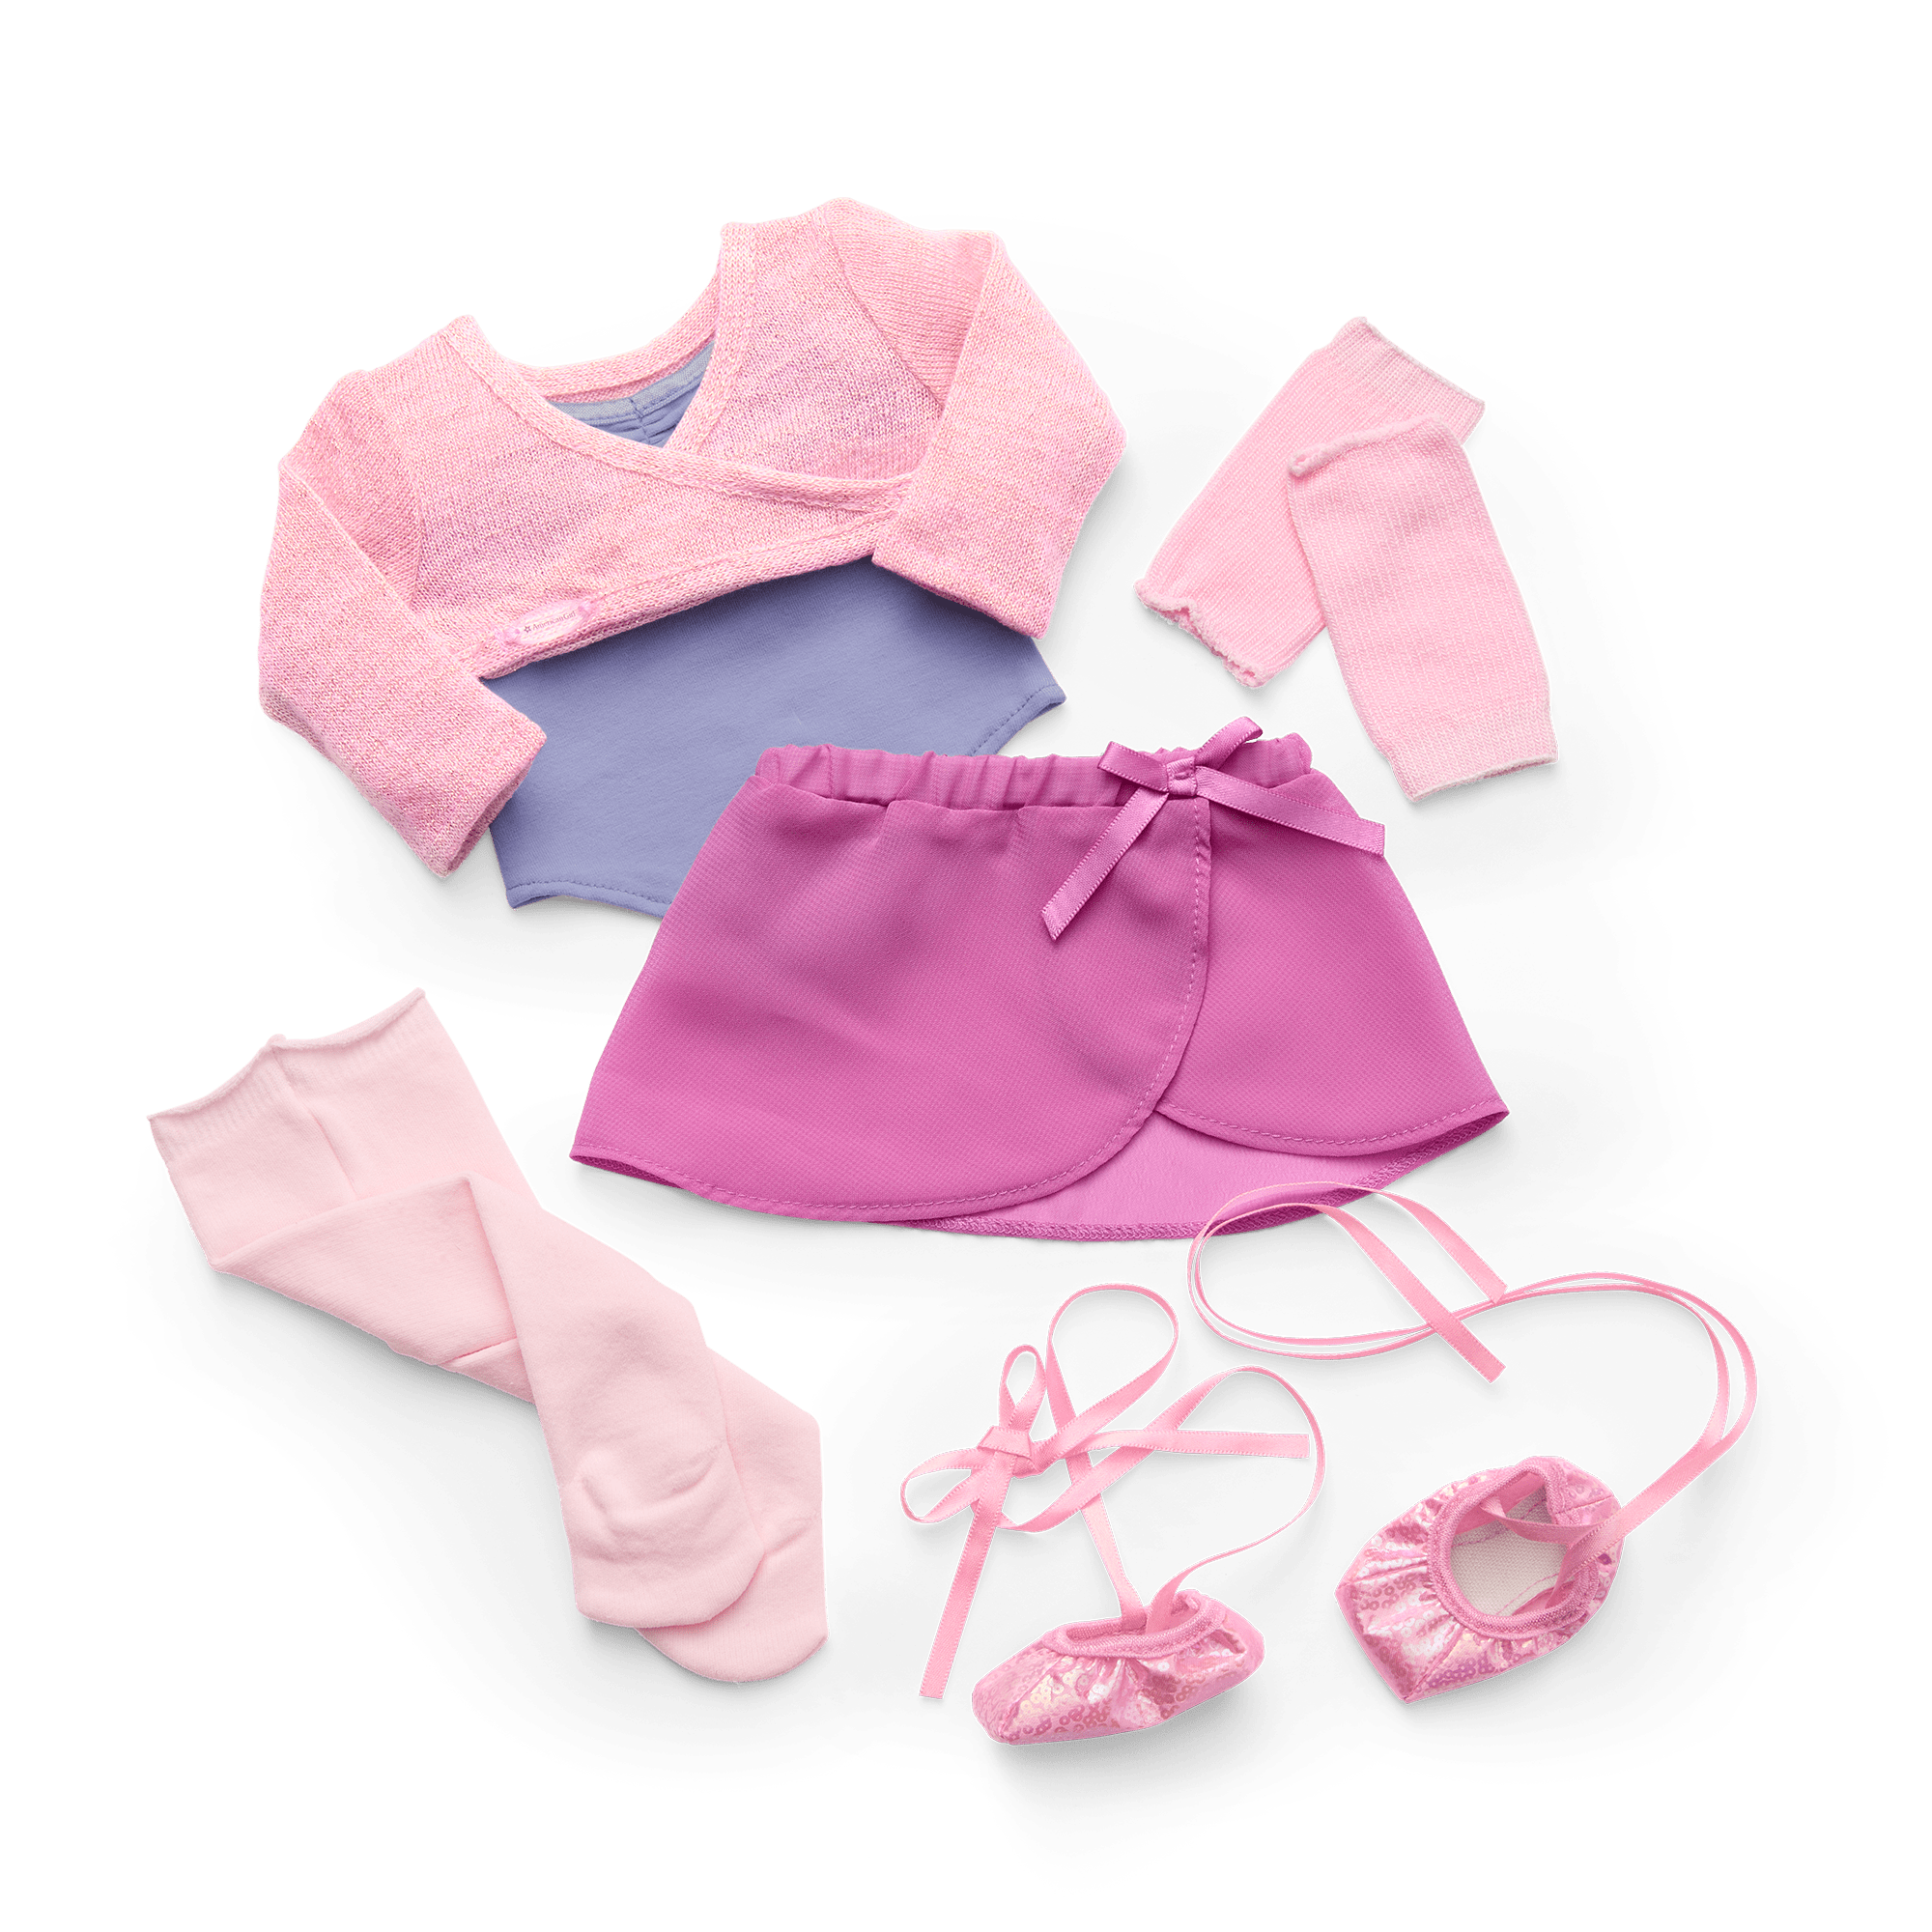  Ecore Fun 8 Piece 18 Inch Girl Doll Clothes and Accessories Set  Include Yoga Sport Clothes Shoes Yoga Bands Towel Drink and Bag : Toys &  Games